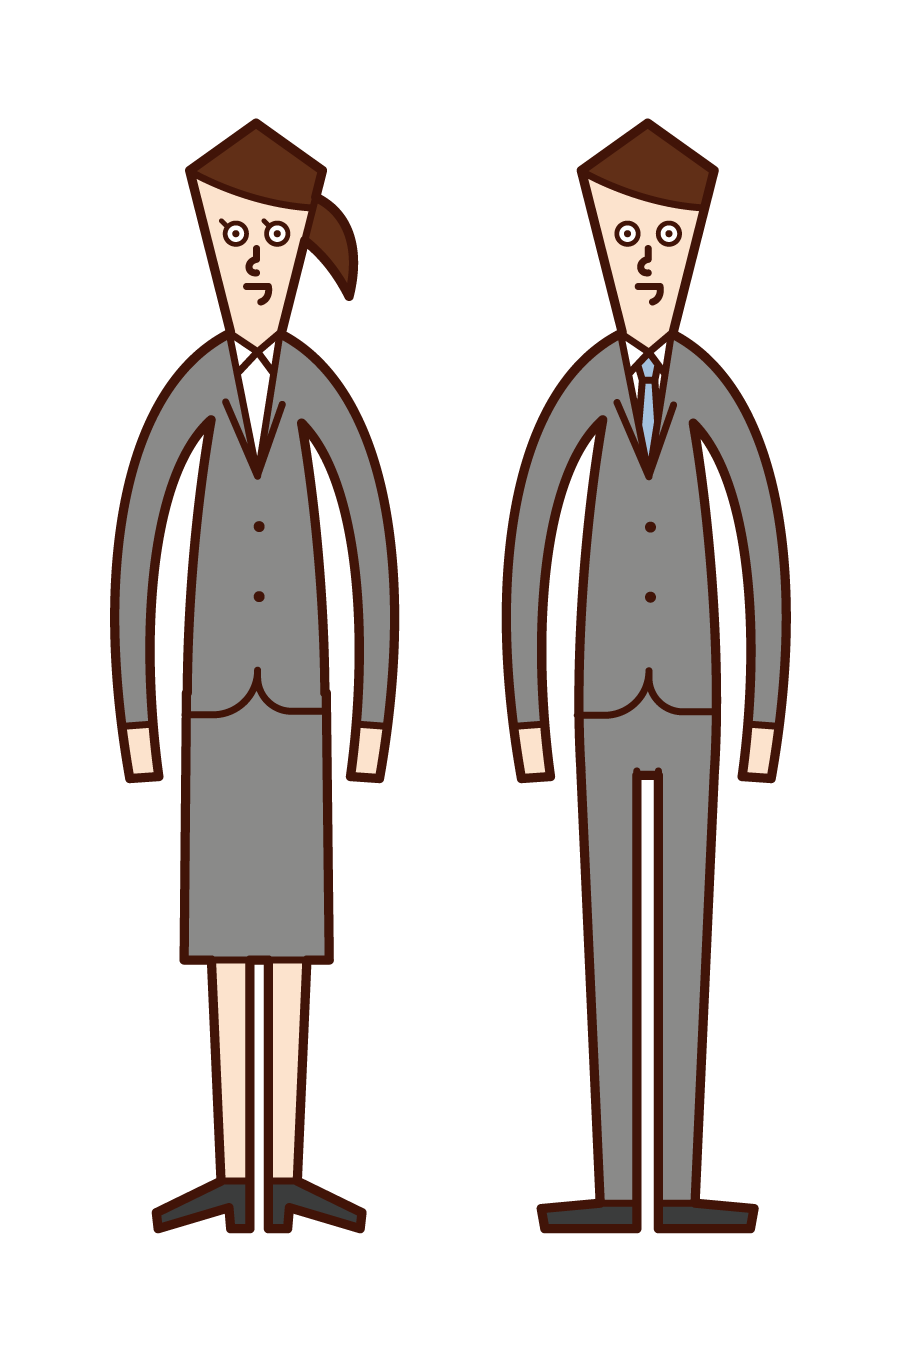 Illustration of a man and woman in a suit